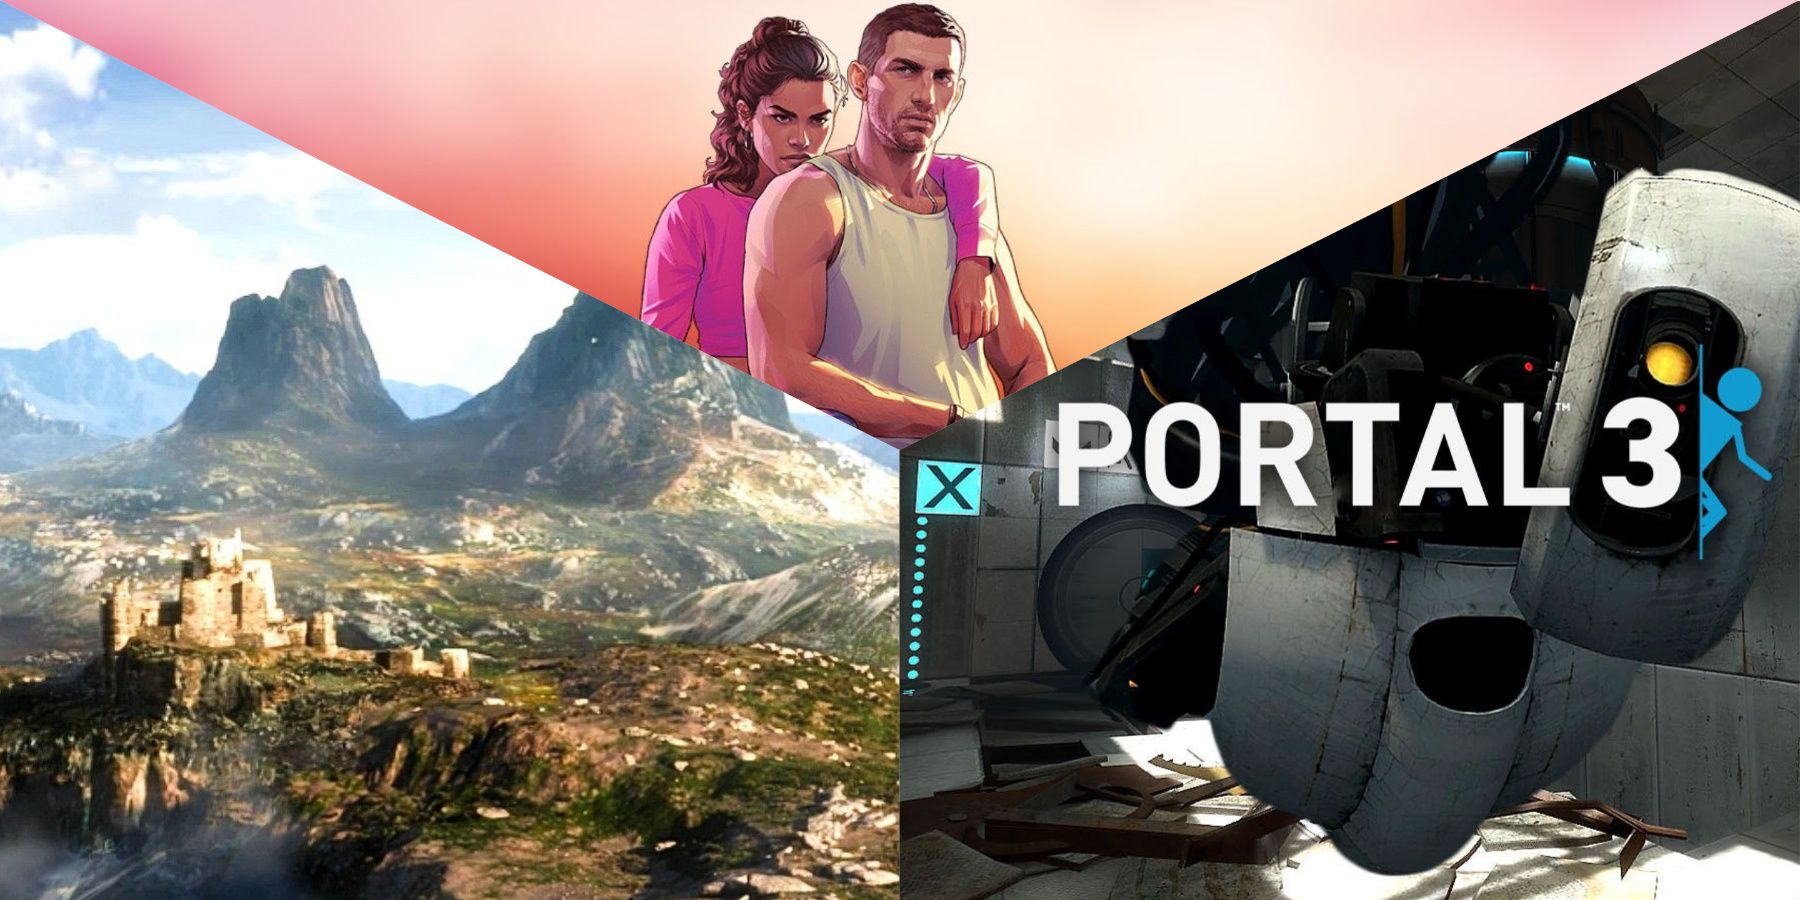 Split Images Featuring The Elder Scrolls 6, GTA 6, and Portal 3